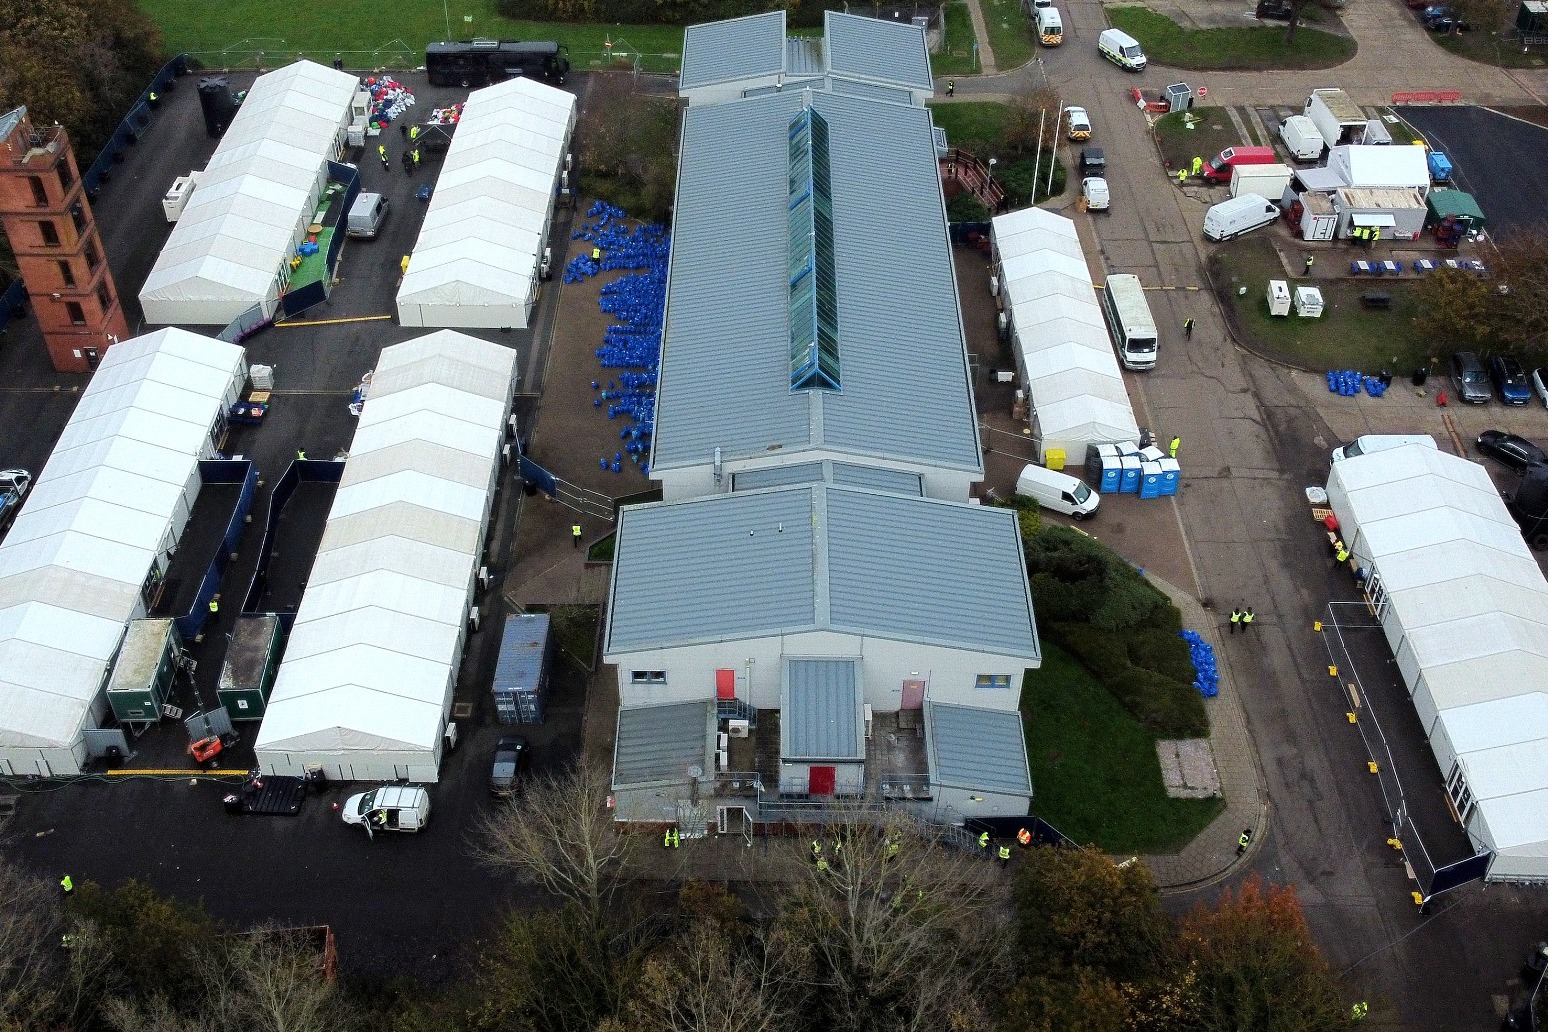 Migrant staying at Manston processing centre in Kent dies in hospital 